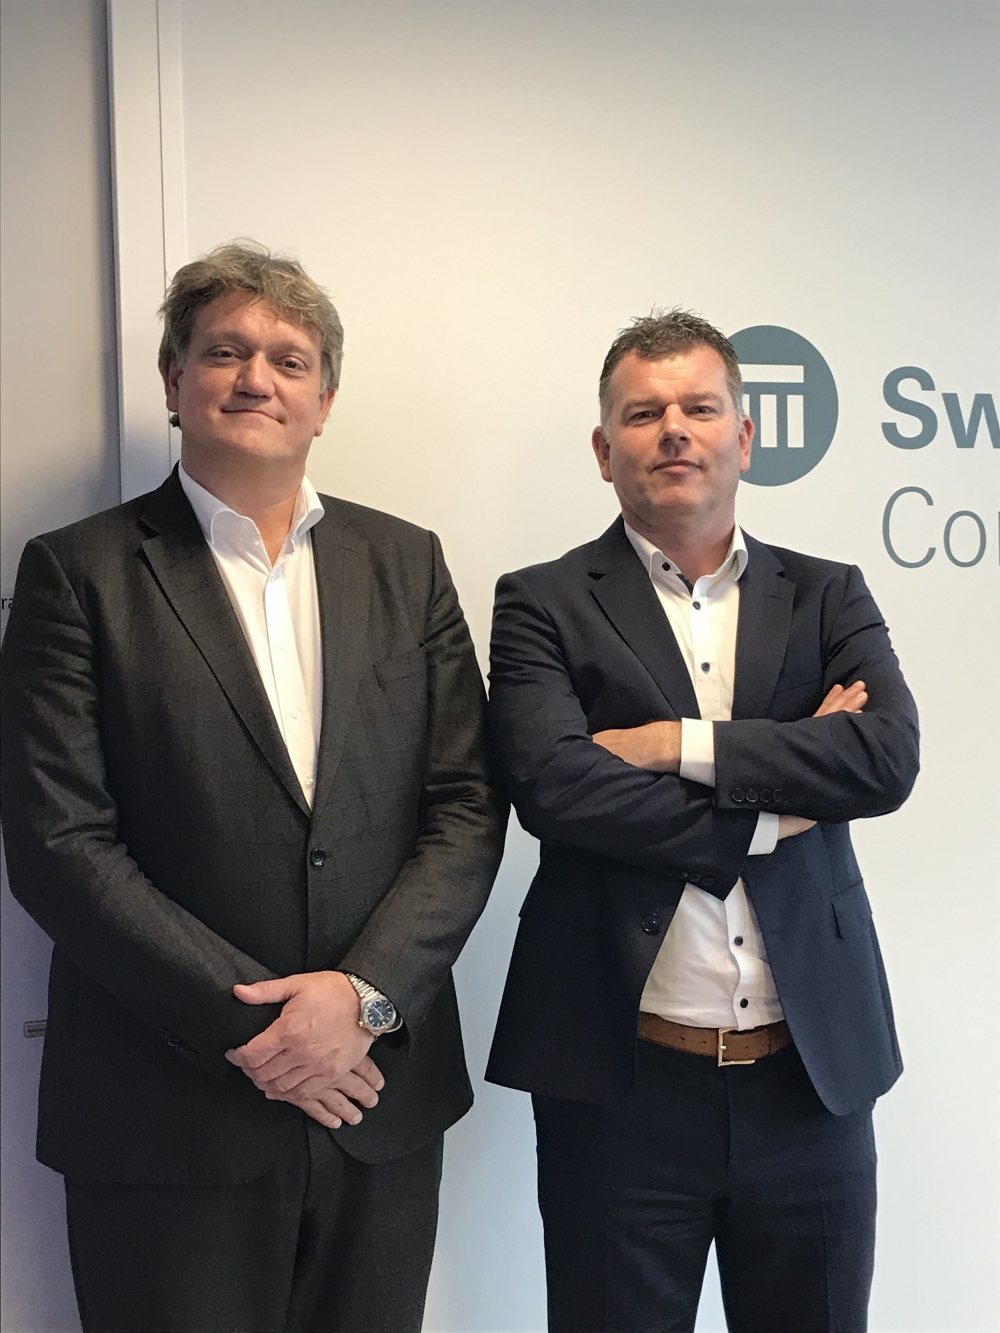 Blog of Swiss Re. Photo of Jeroen Weurding, Country Manager Benelux (left) and Gerth-Jan Heck Senior, Underwriter Construction and Engineering (right).